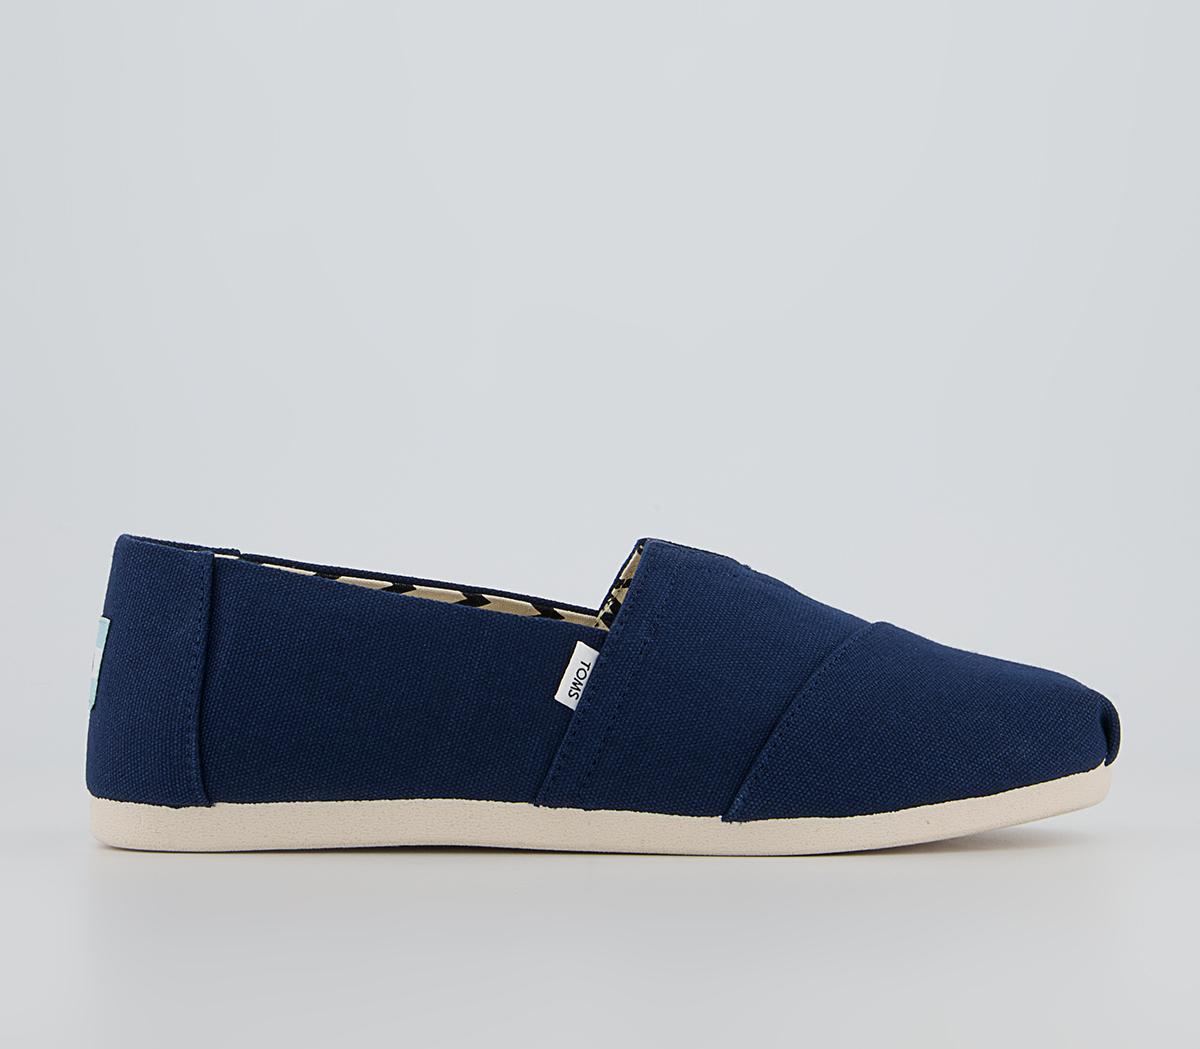 TOMS Toms Classic Alpargata Slip Ons Navy Recycled Cotton Canvas - Men ...